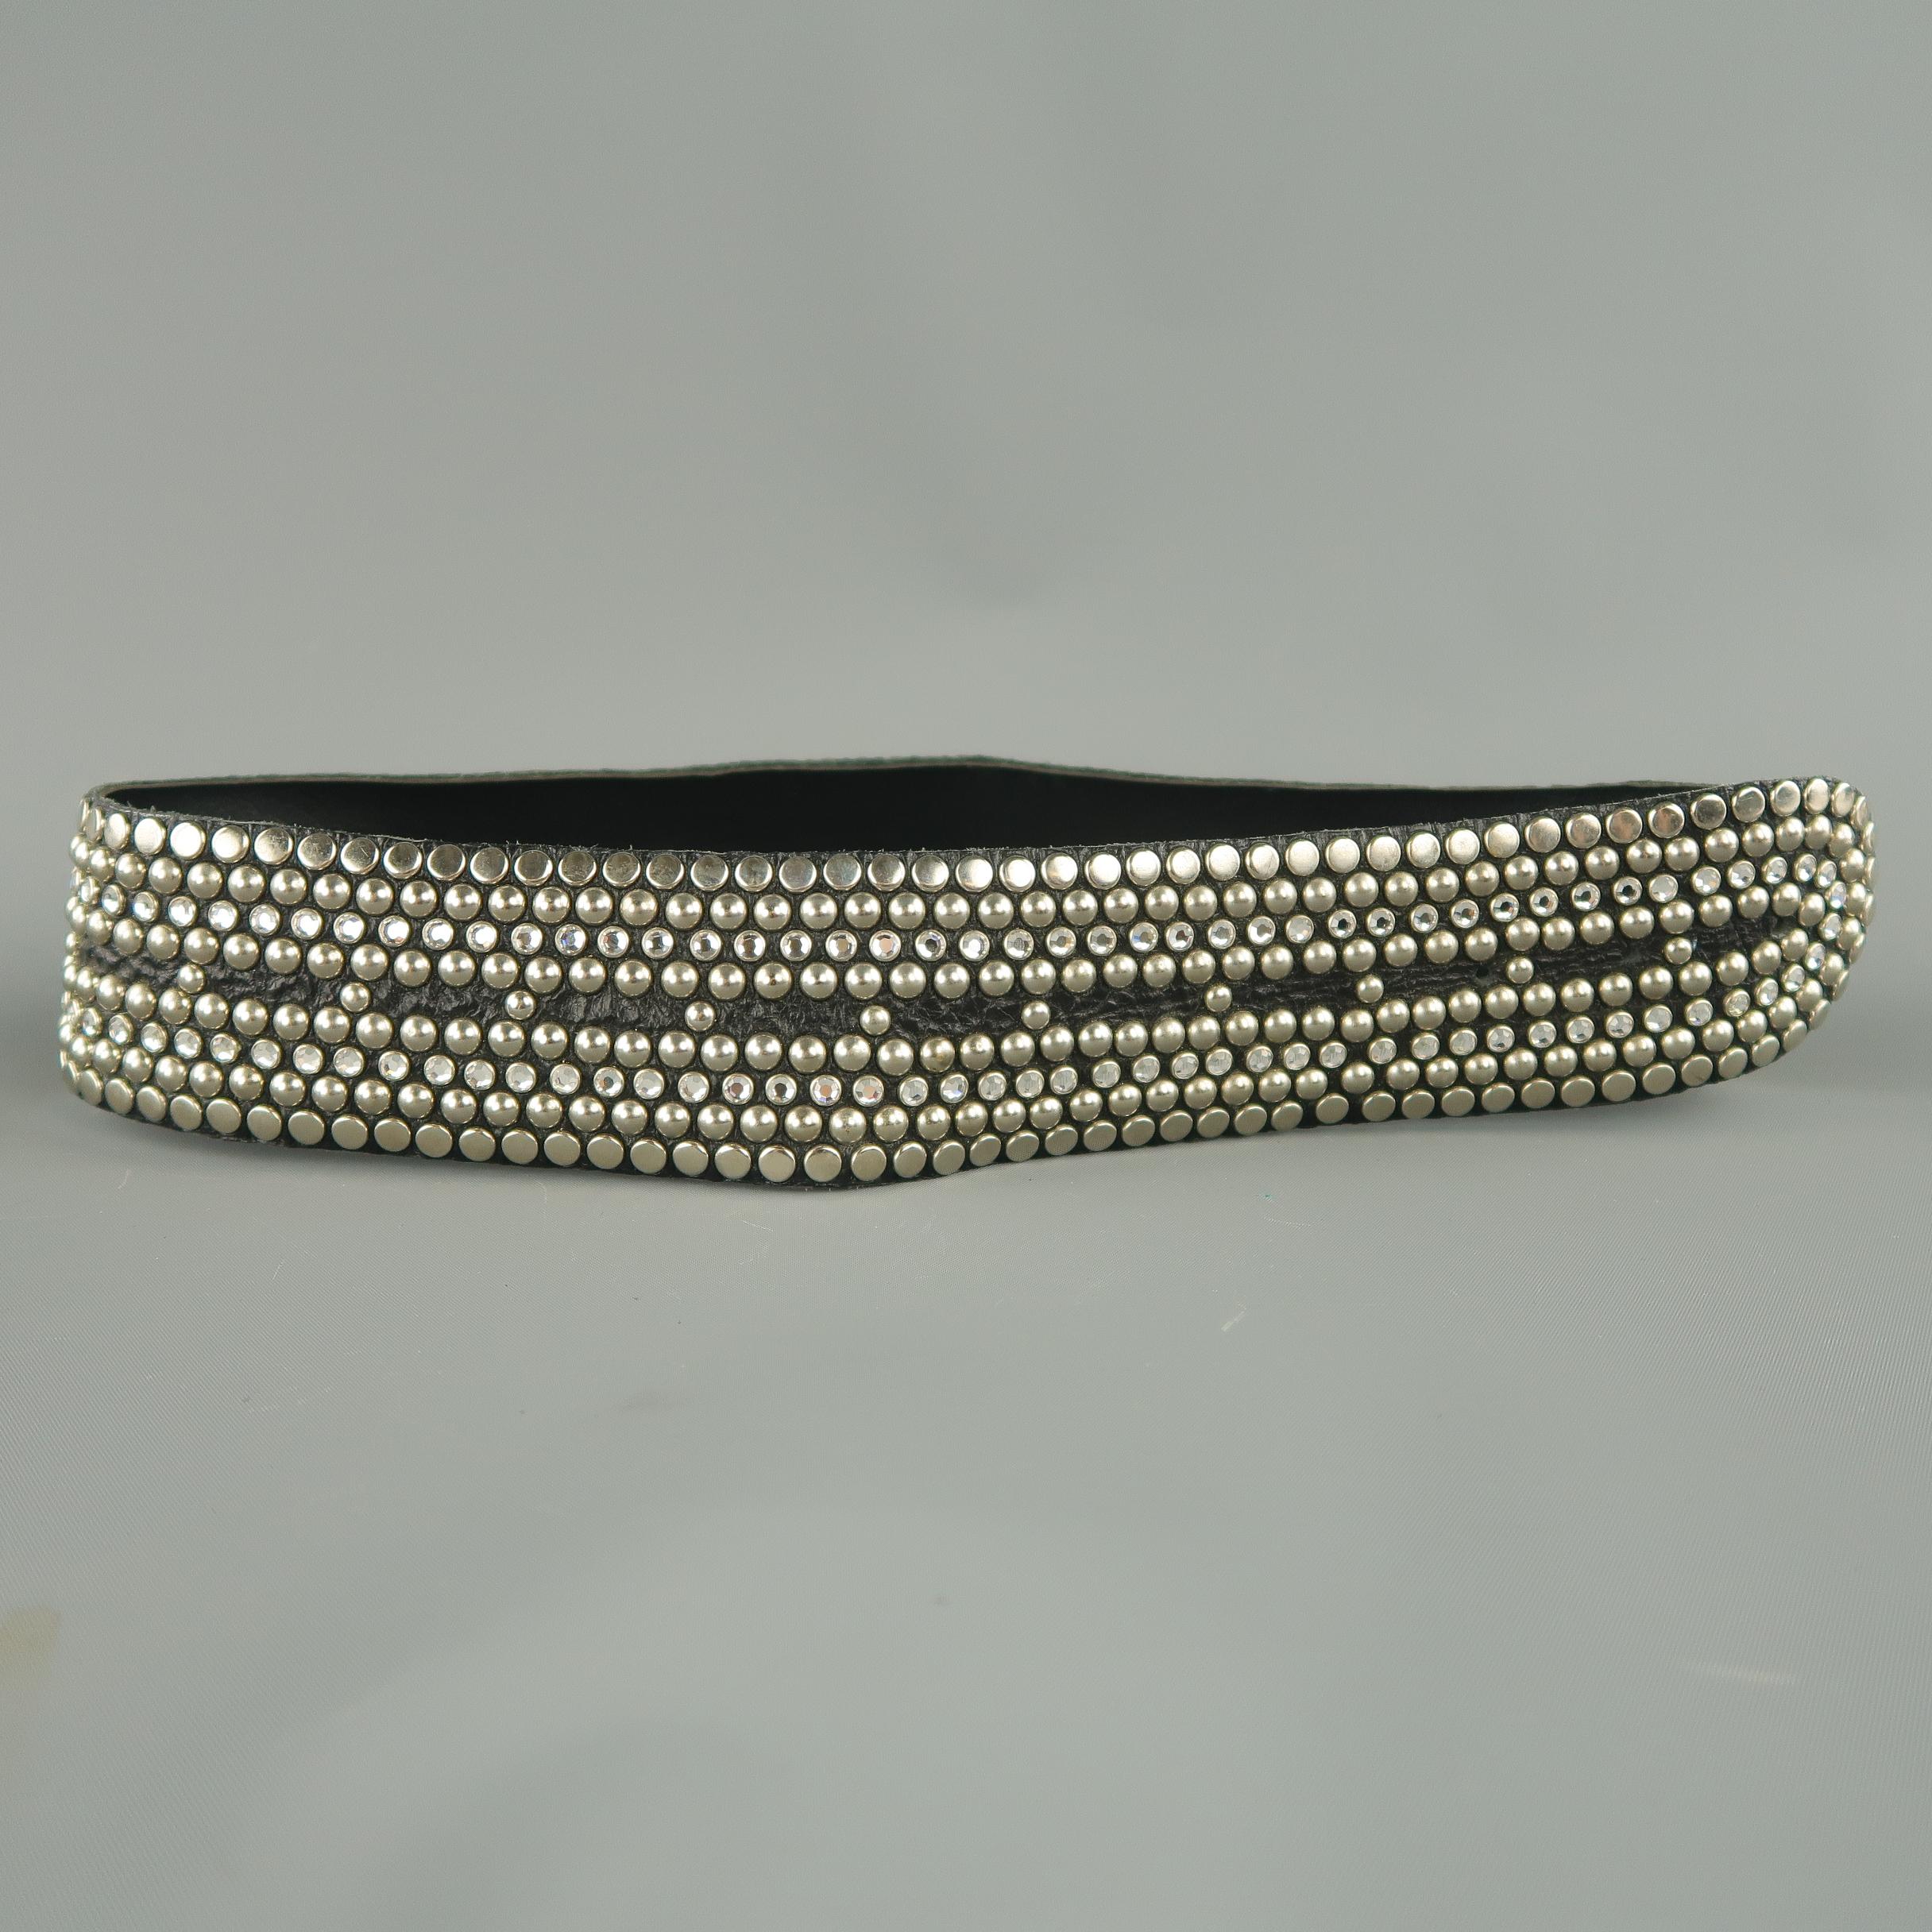 Vintage KIPPY'S belt strap comes in black leather with all over flat, dome, and rhinestone stud embellishments and metal logo. Punched holes to attach a double button stud buckle.
 
Excellent Pre-Owned Condition.
 
Measurements:
 
Length: 29